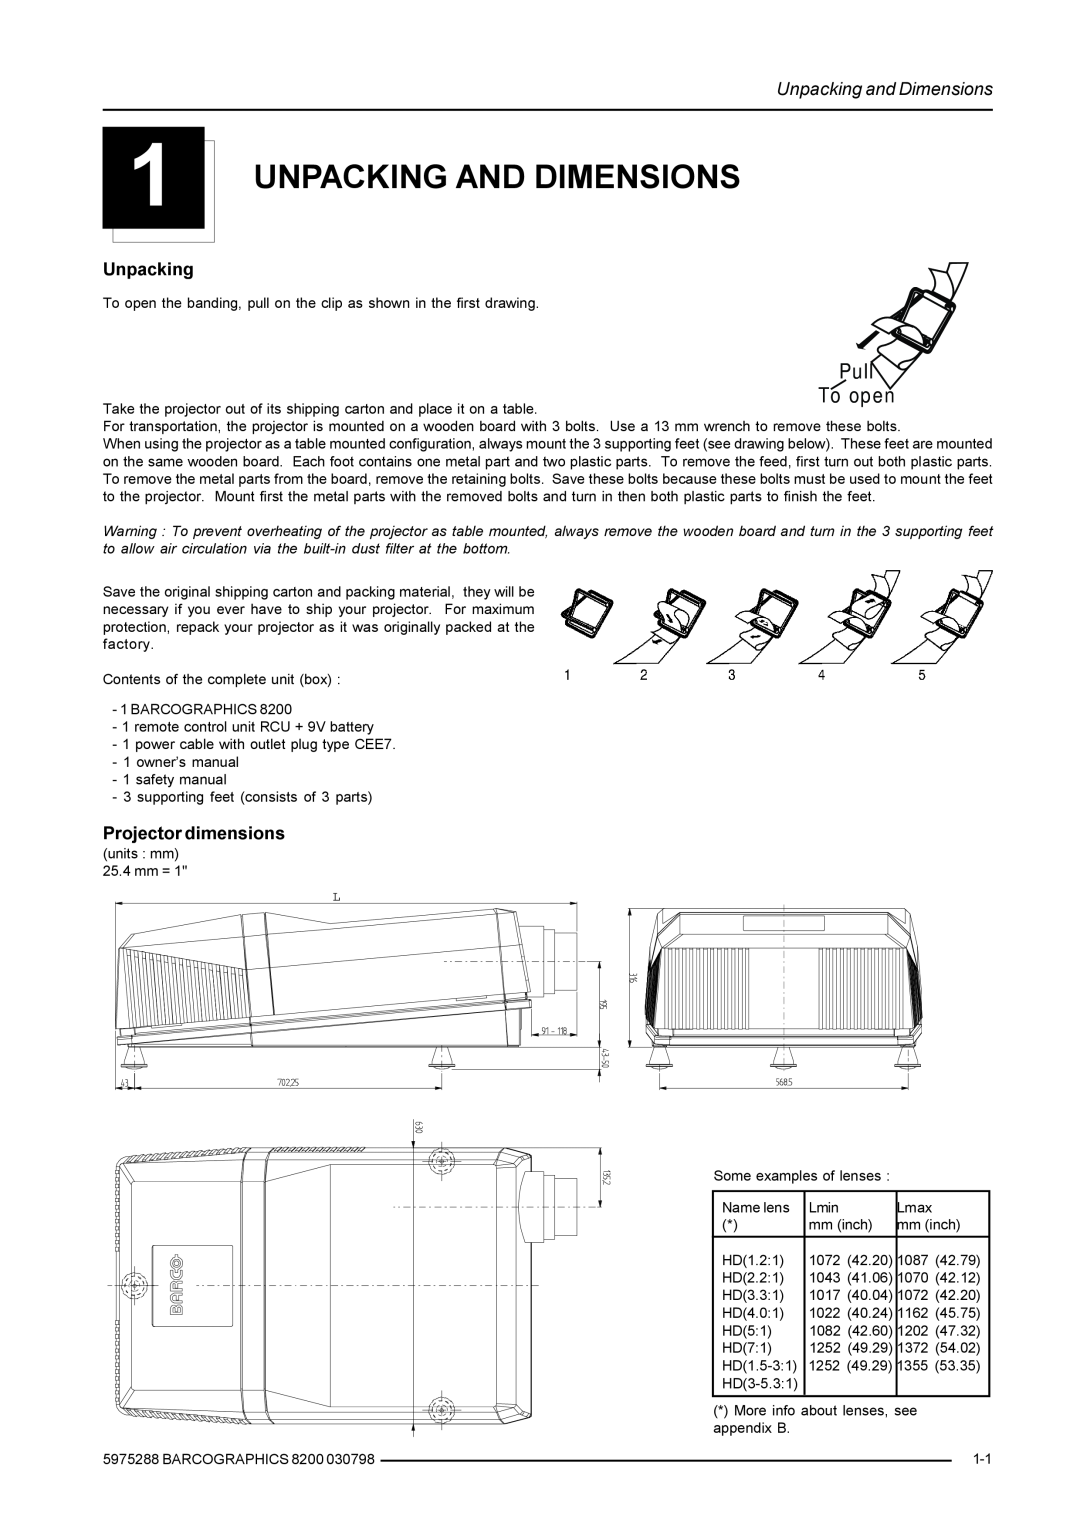 Barco 9200 owner manual Unpacking And Dimensions, Unpacking and Dimensions, Projector dimensions, Pull To open 